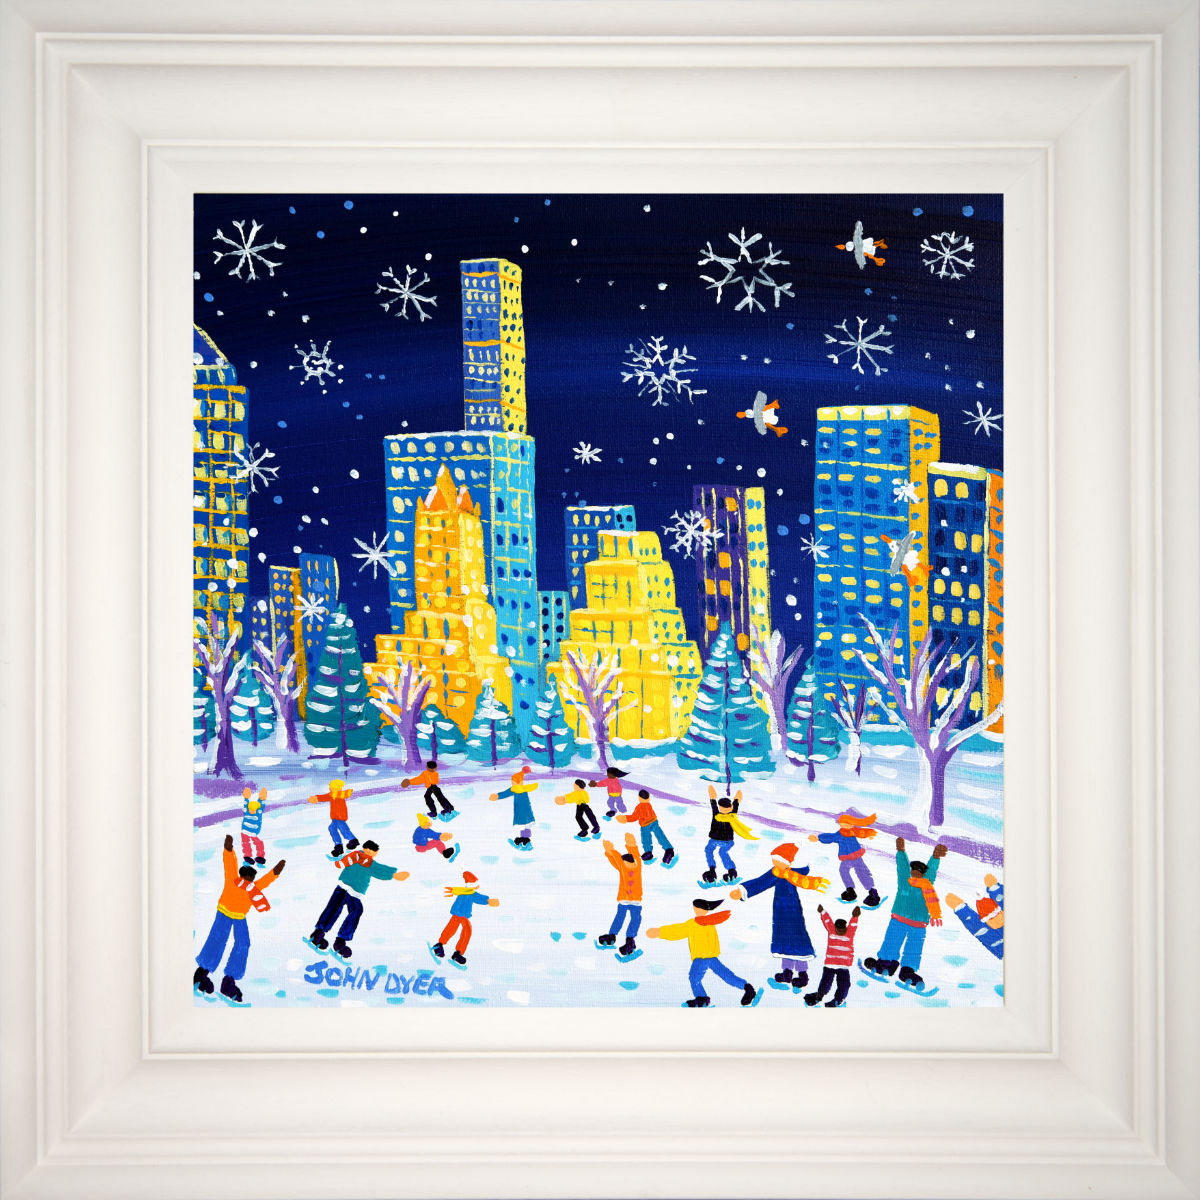 'Winter Wonderland, Central Park, New York', 12x12 inches acrylic on canvas. Paintings of America by British Artist John Dyer. American Art Gallery. Ice Skating